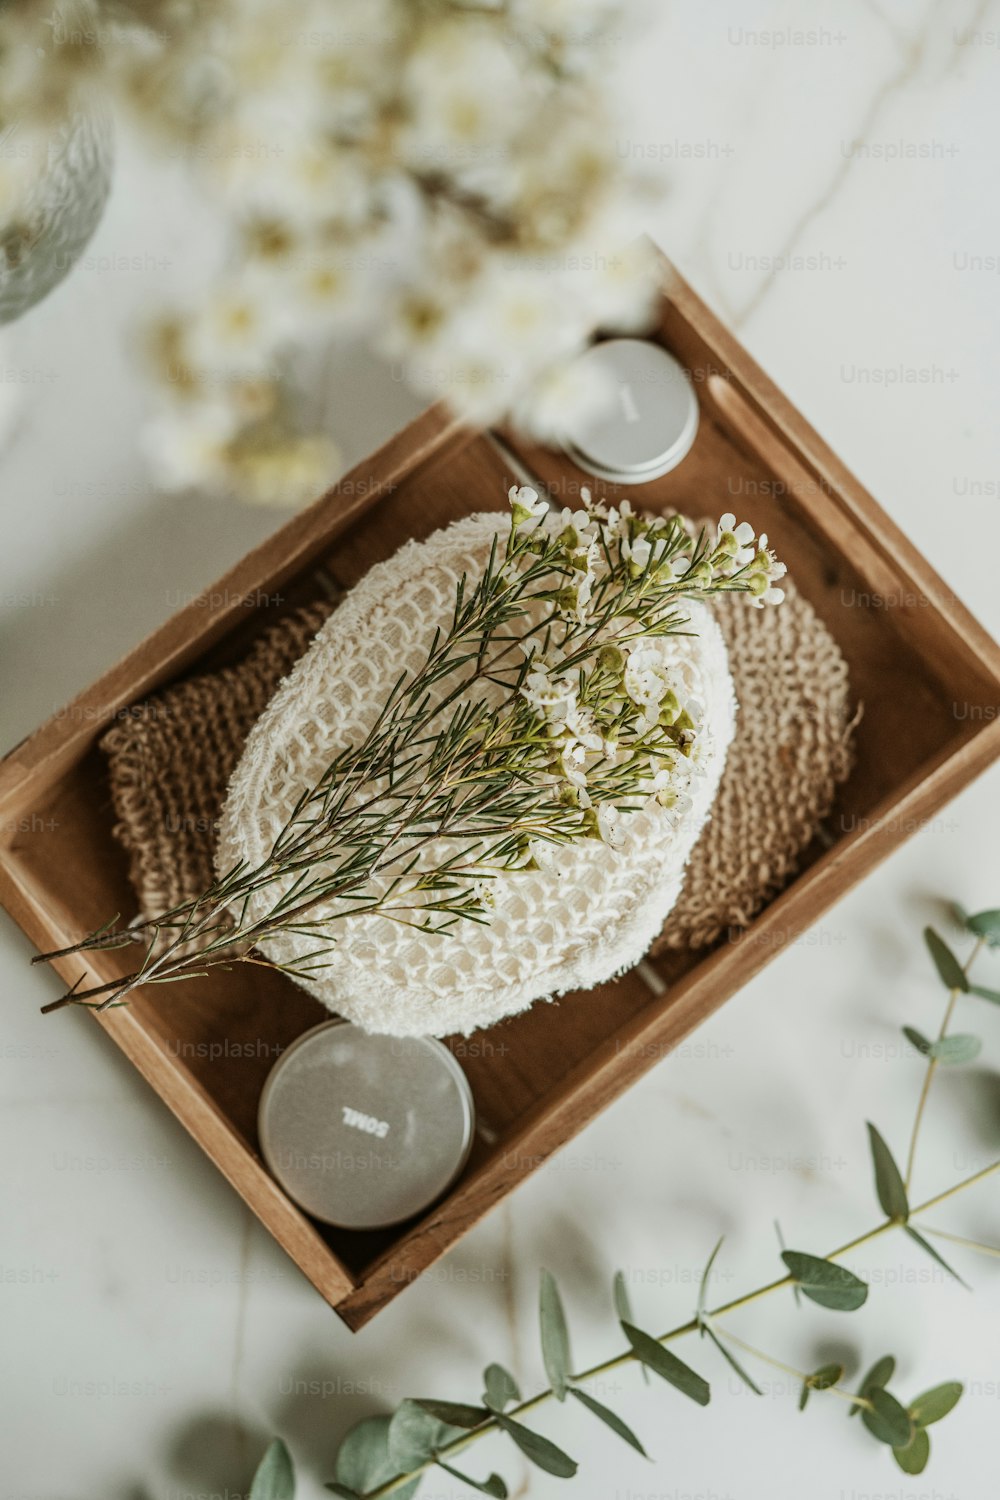 a wooden tray with a knitted hat and candles